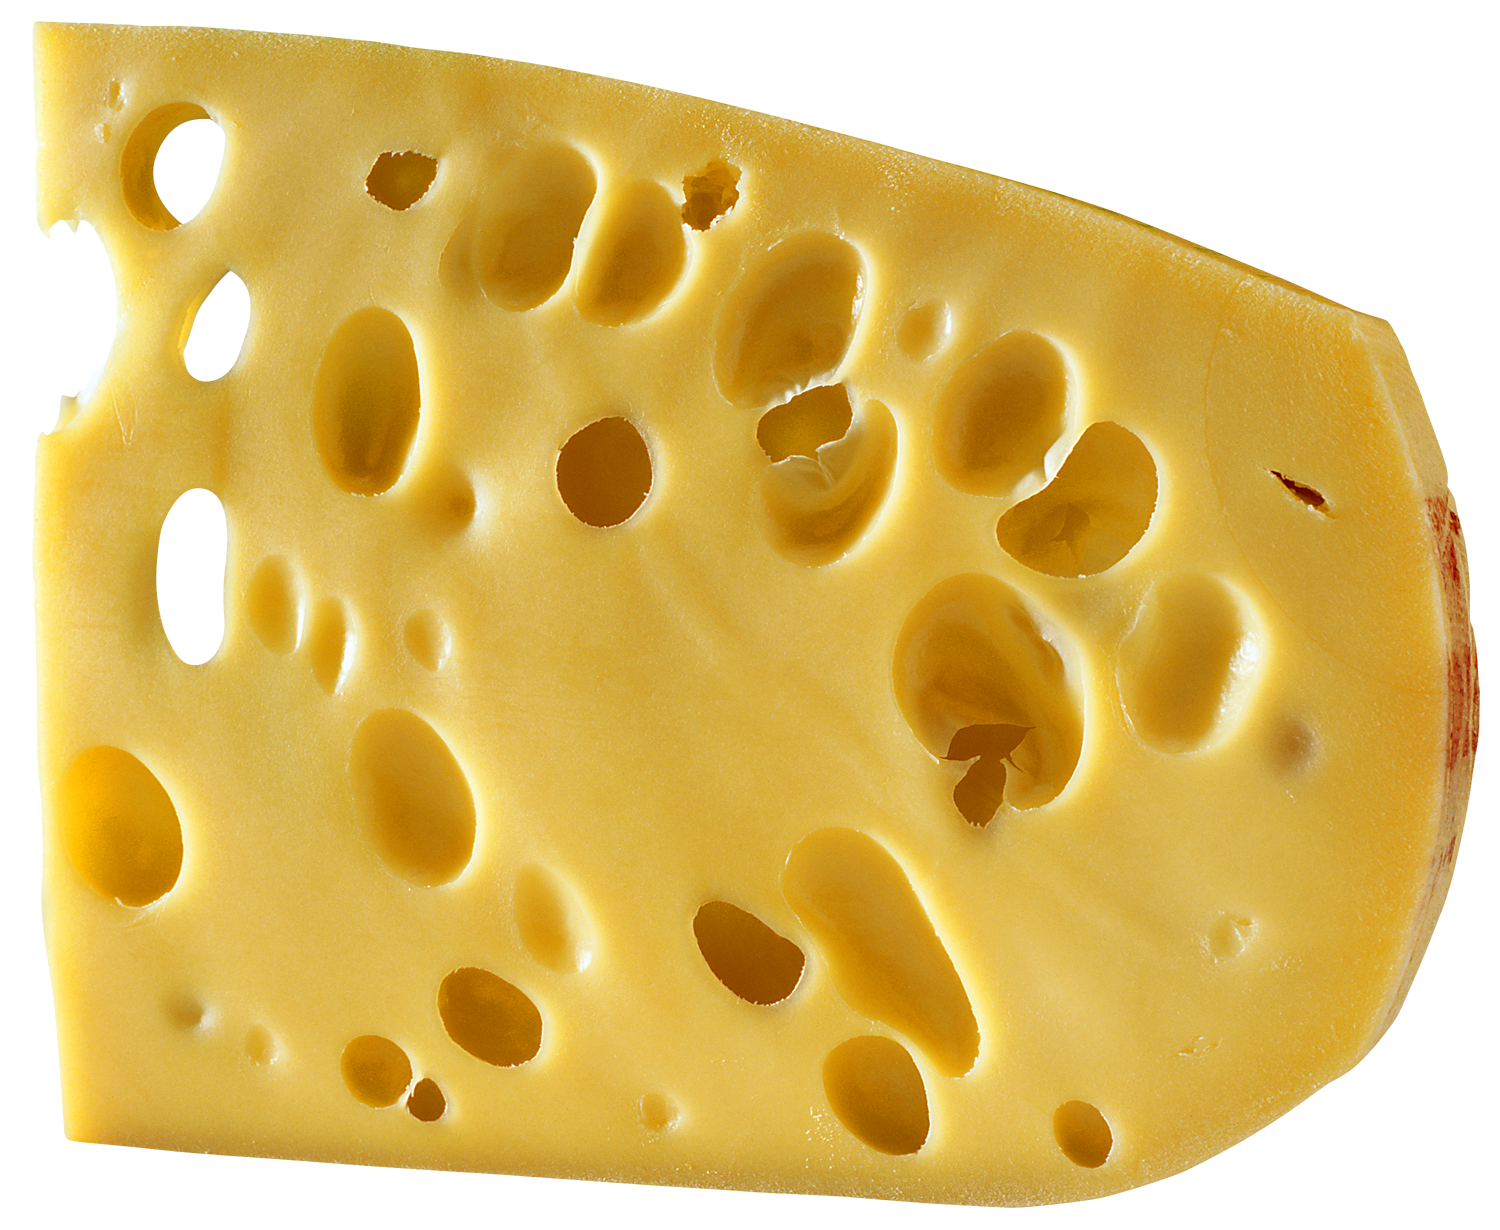 clipart camera cheese